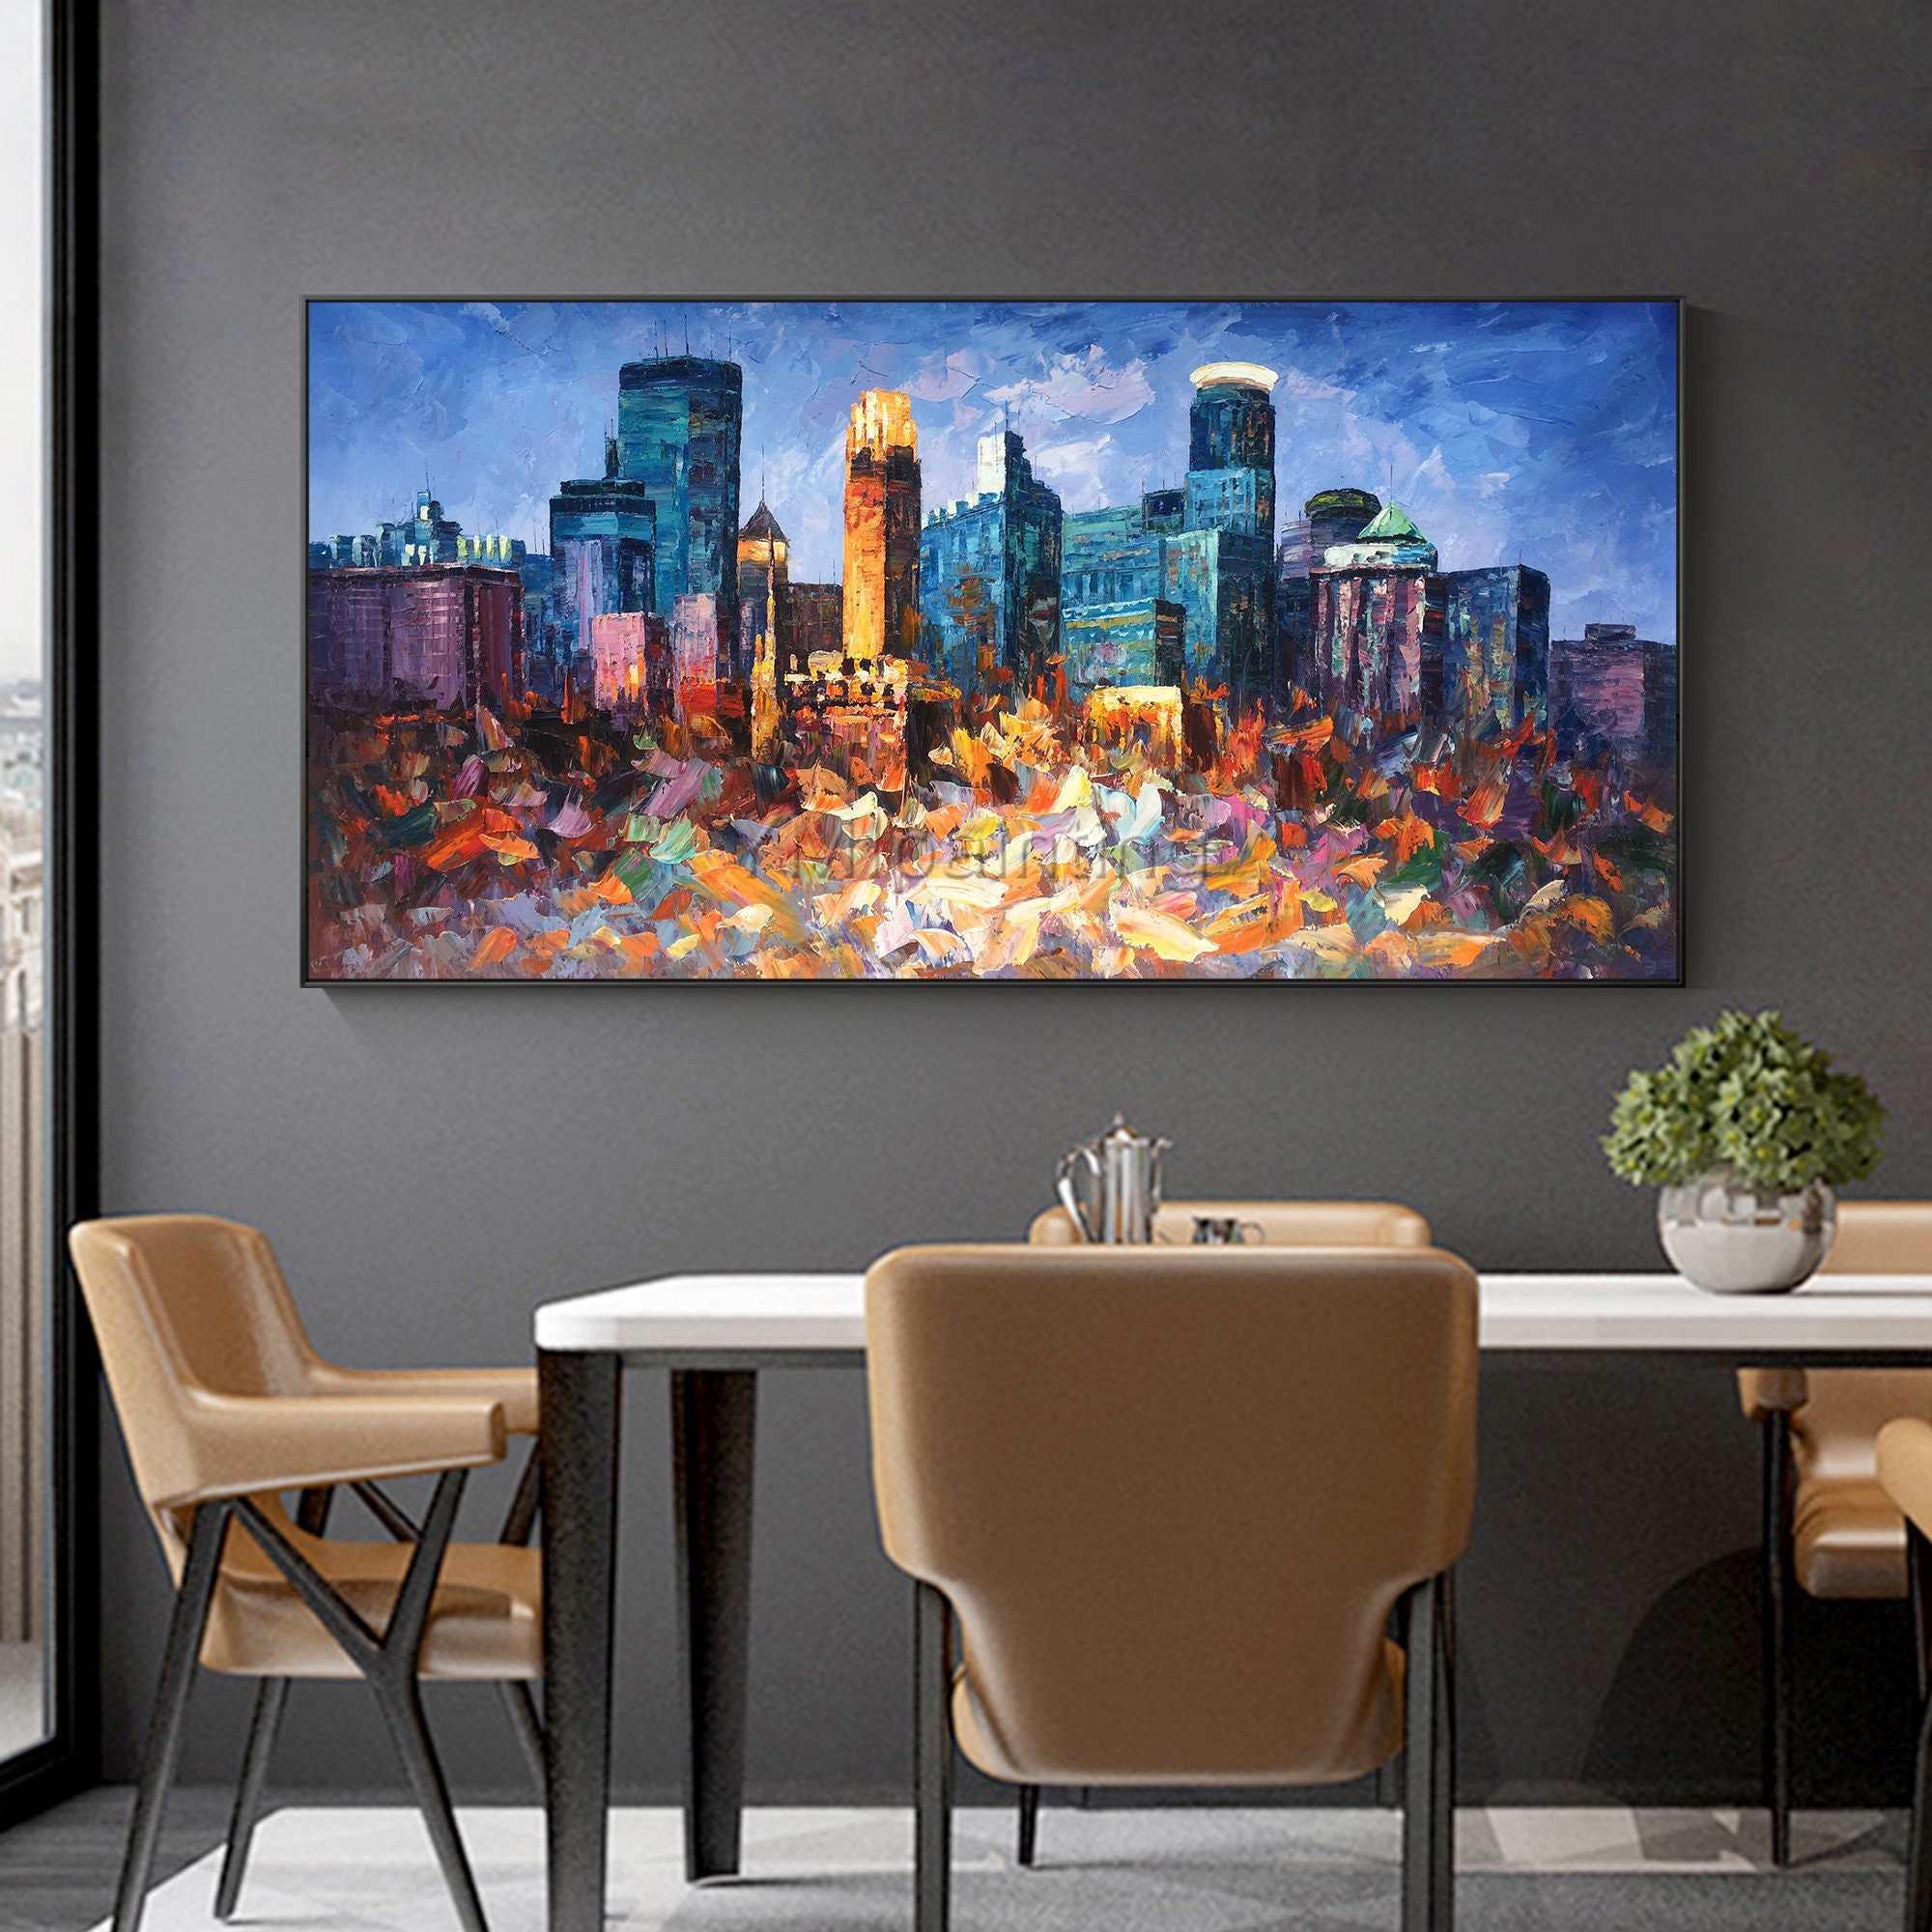 Acrylic Impasto Mini Picture 6 by 8 inches Original Cityscape Painting Bright Cityscape Impressionist Night Painting On Canvas